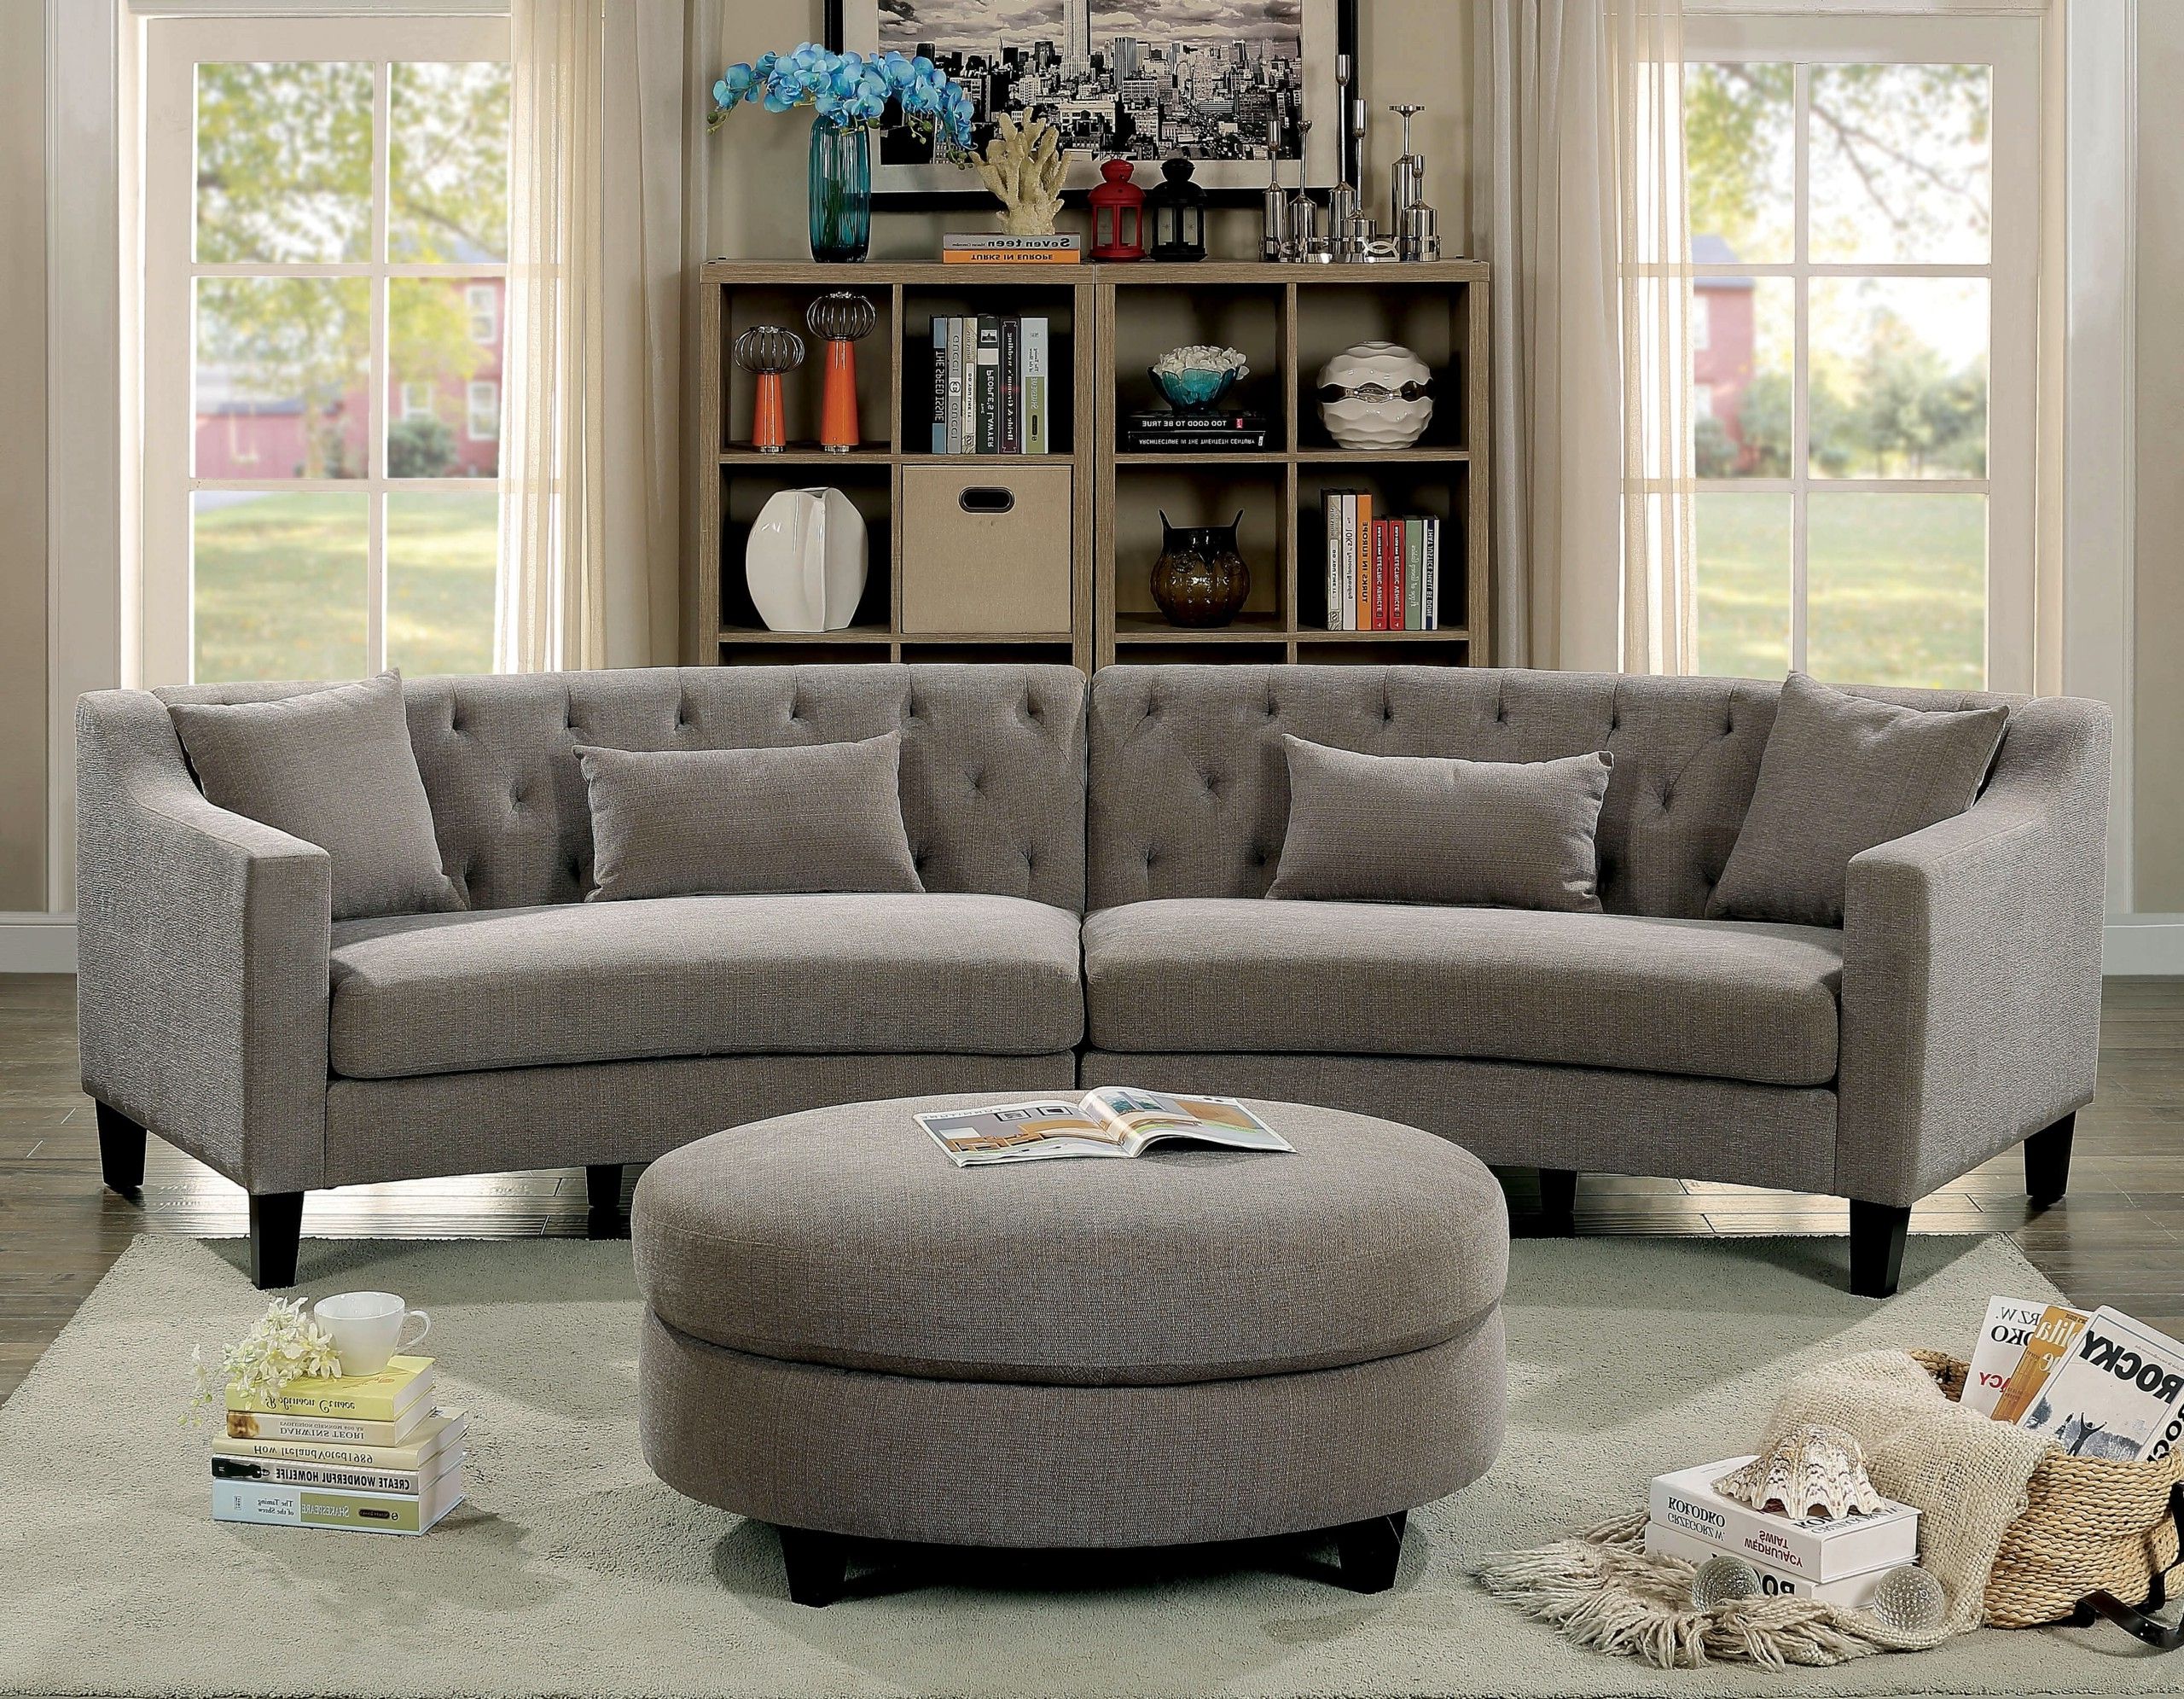 Small Curved Sectional Sofas / Couches – Ideas On Foter In Fashionable 3 Piece Curved Sectional Set (View 11 of 15)